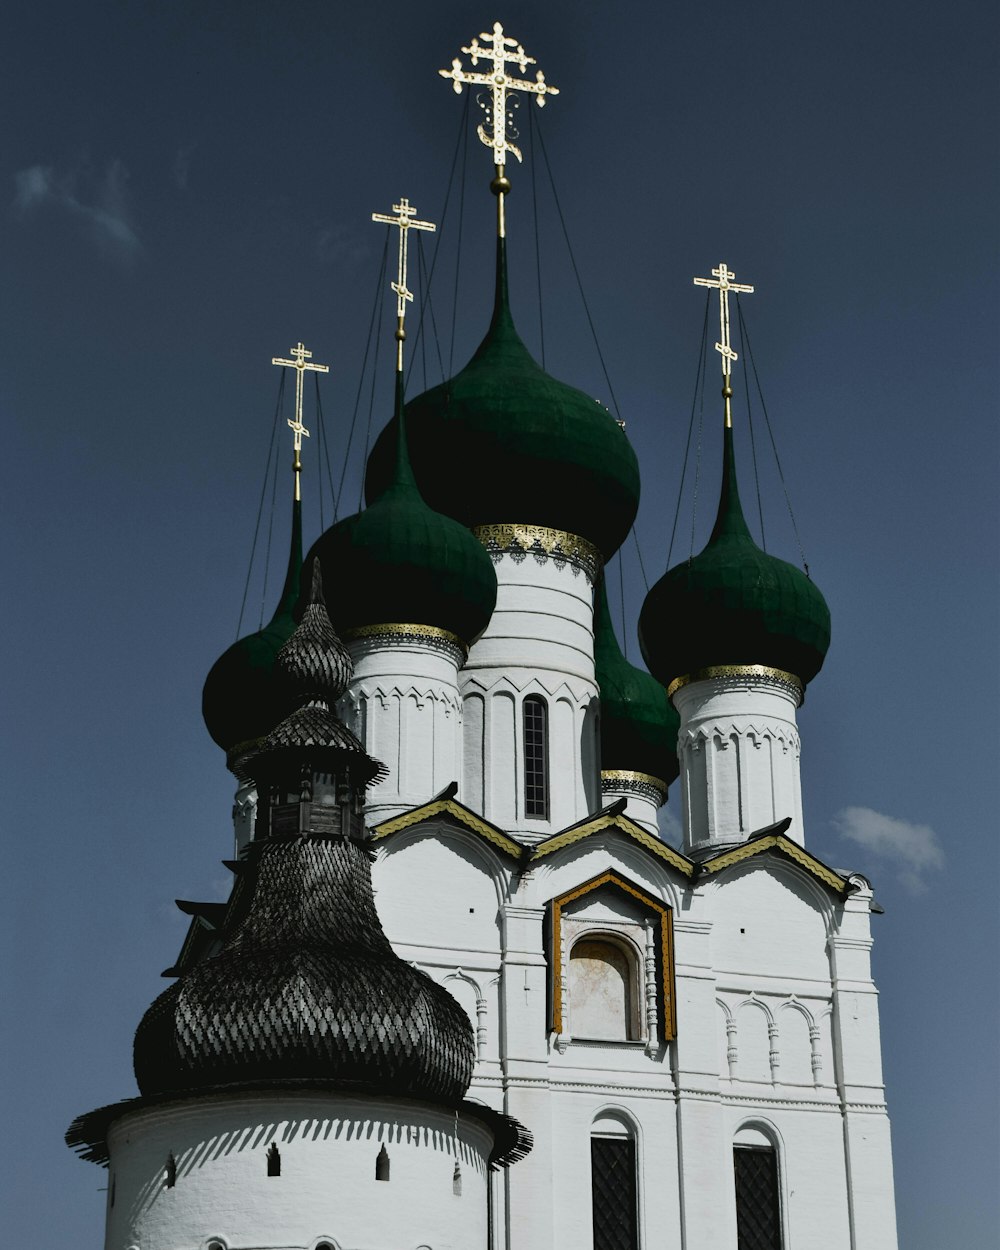 a white church with green domes and crosses on top